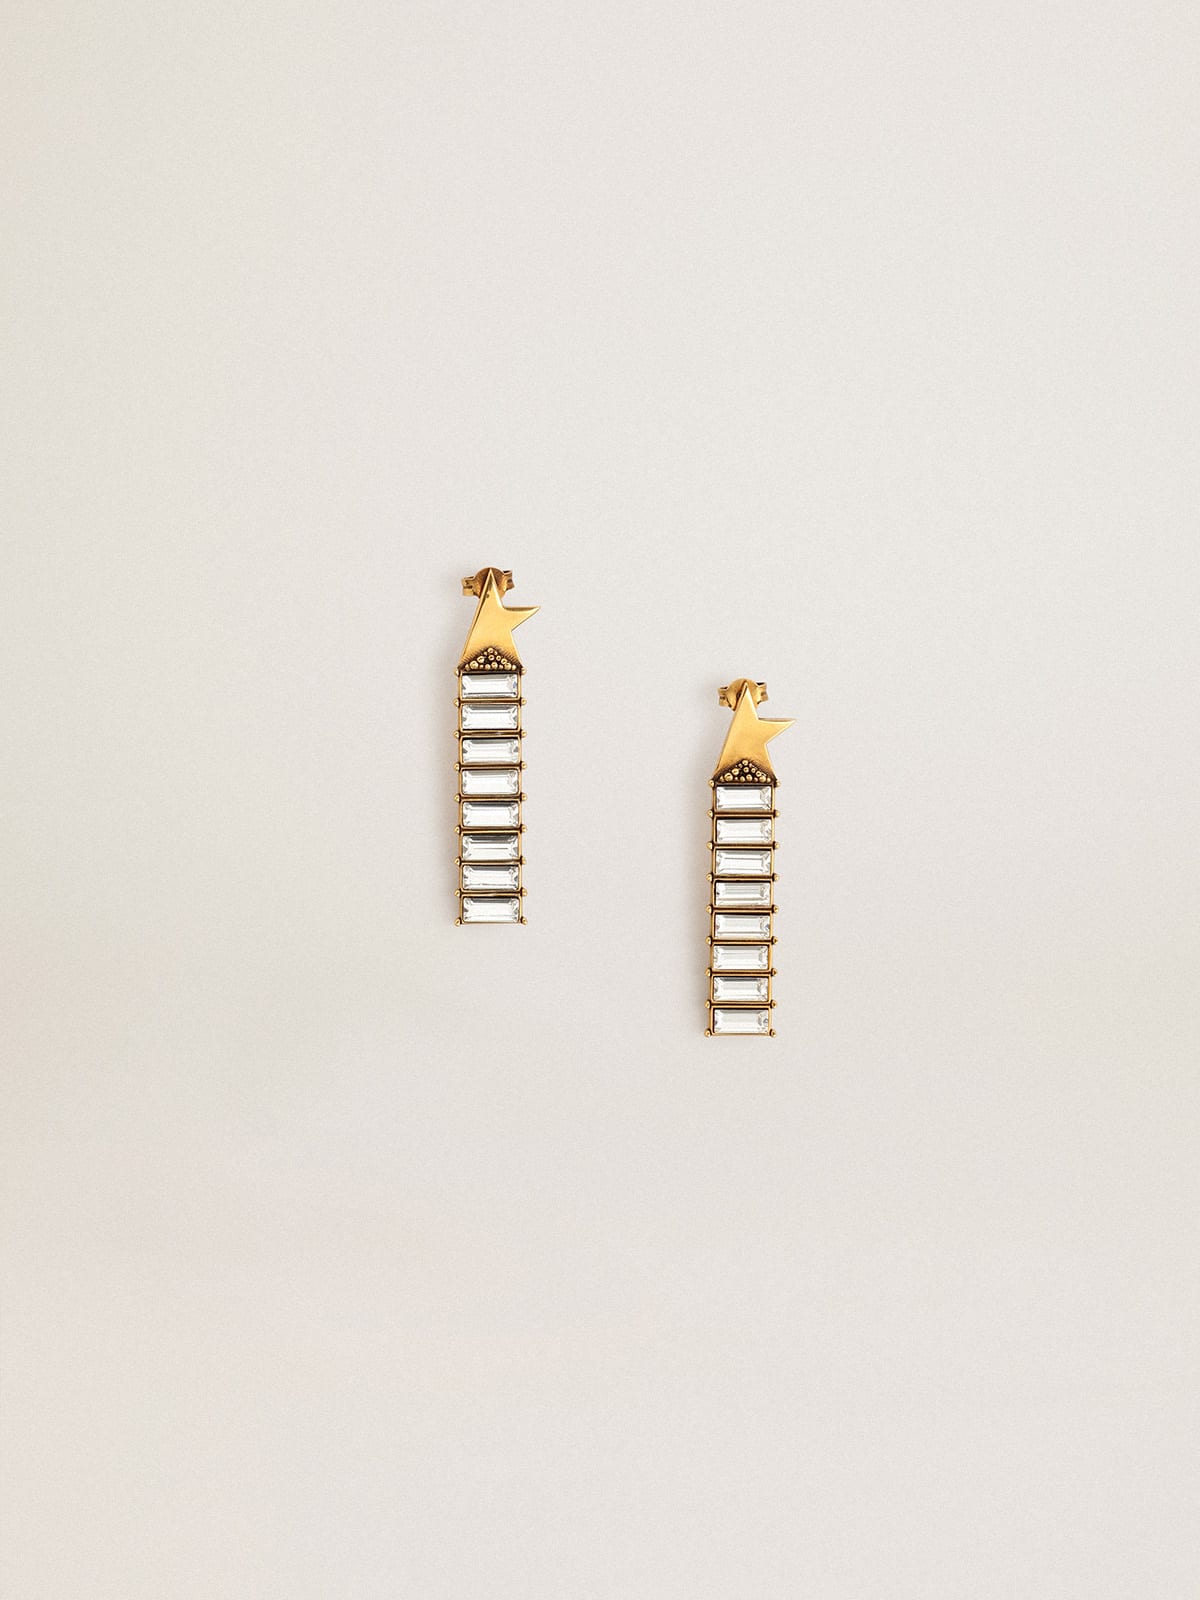 Drop earrings with old gold star and baguette-shaped crystals